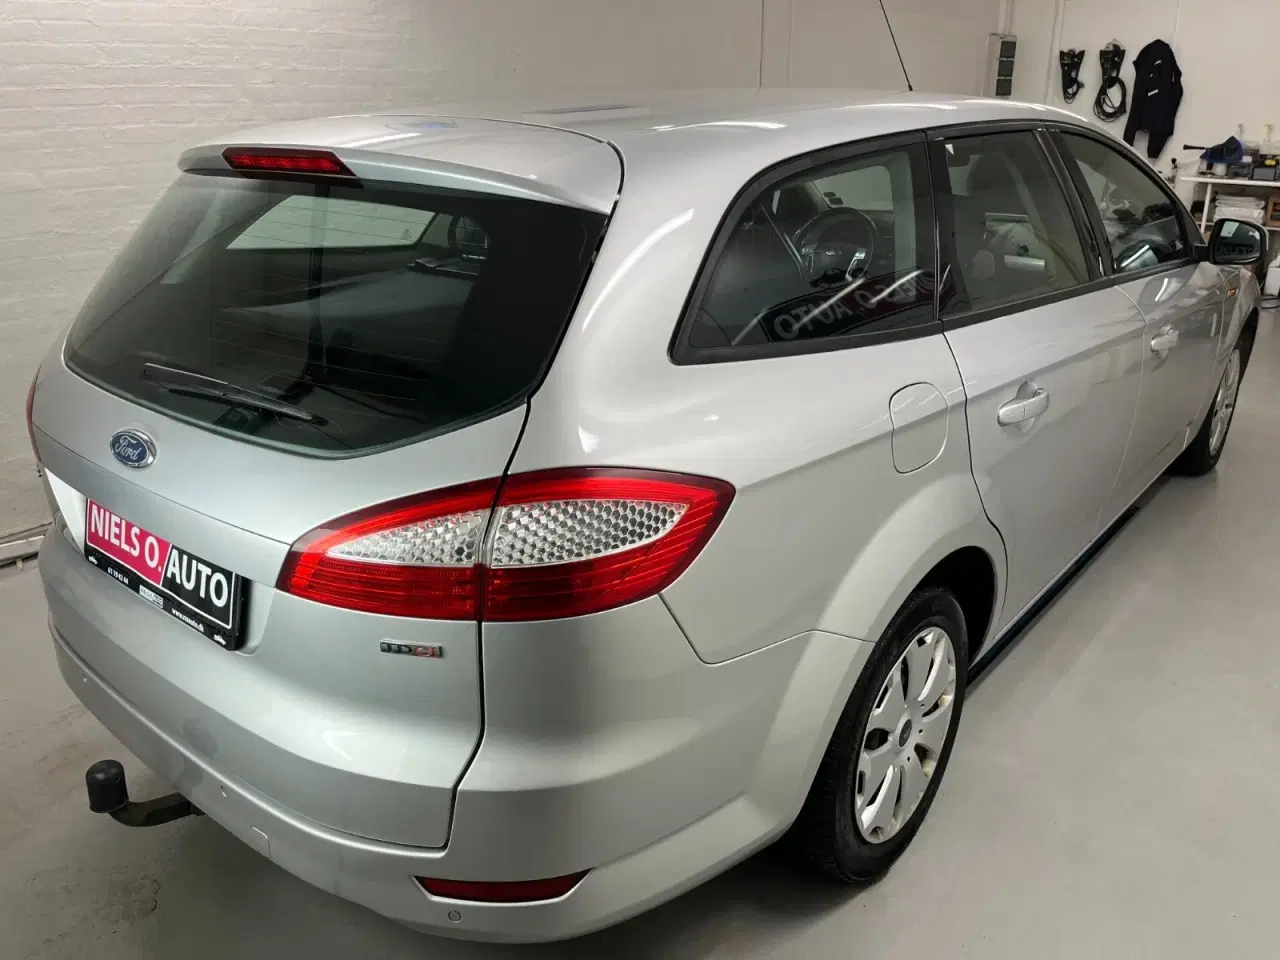 Billede 4 - Ford Mondeo 2,0 TDCi 140 Trend Collection stc.